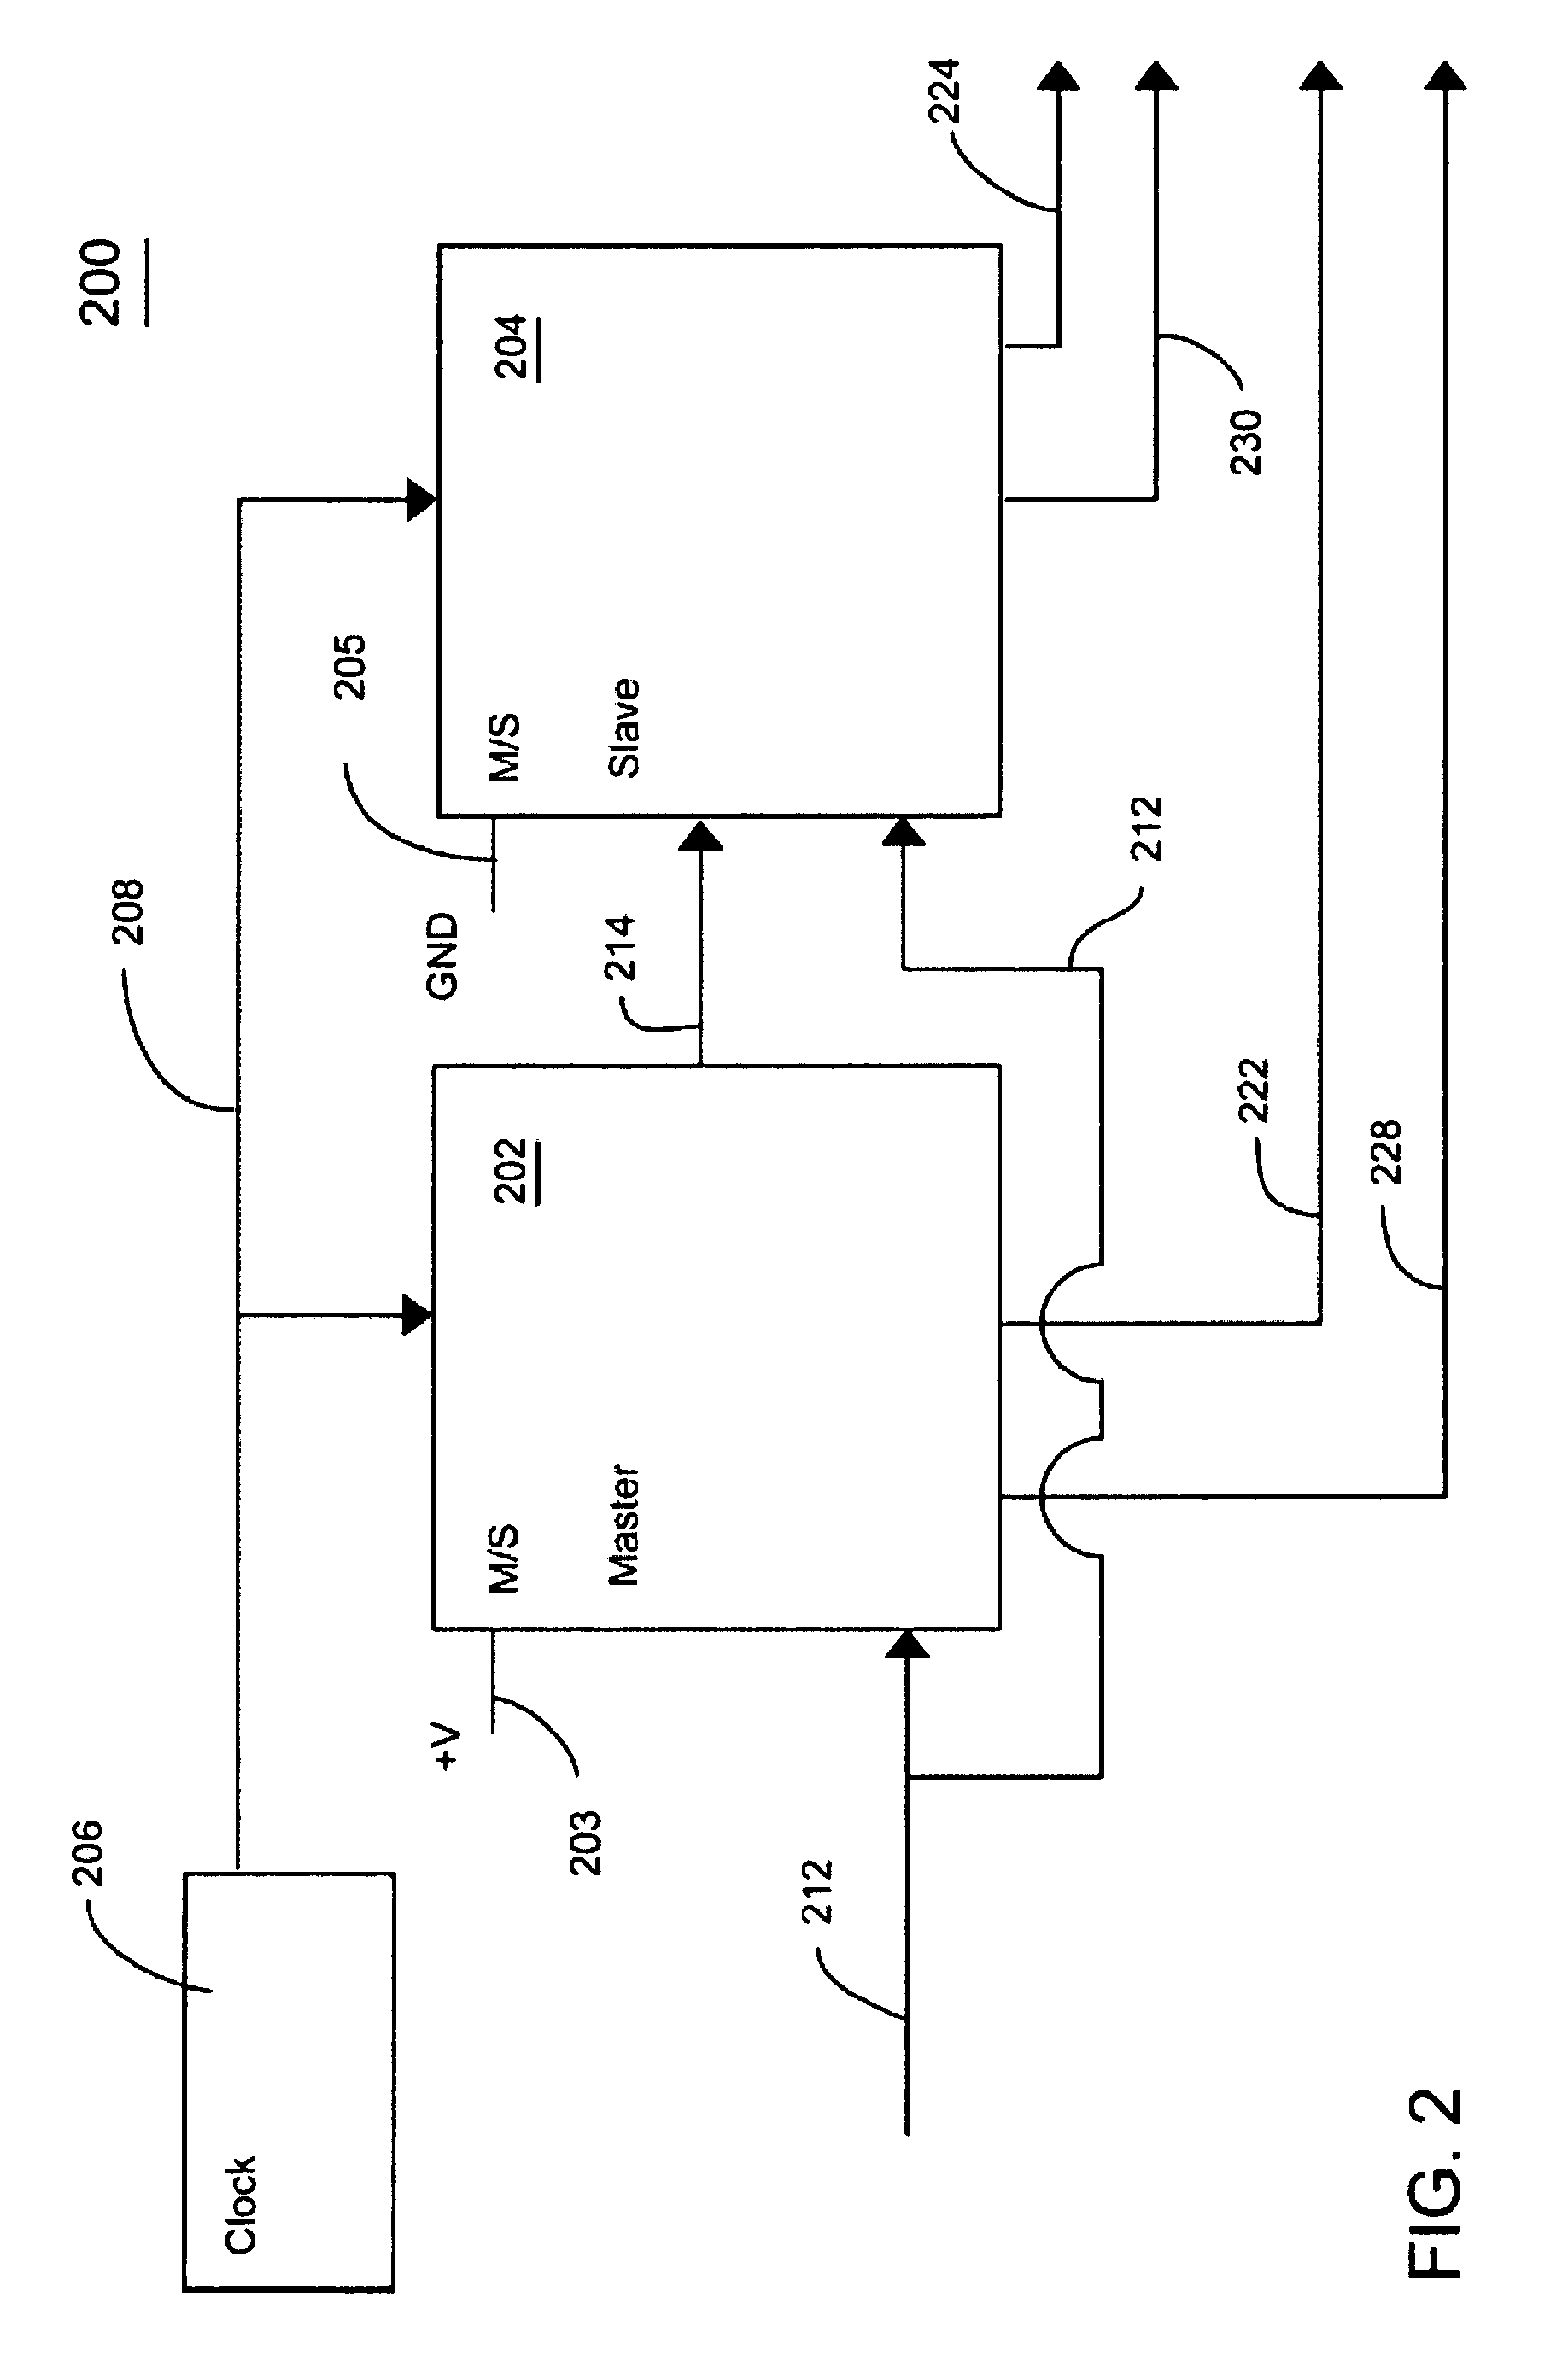 CMOS stereo imaging system and method